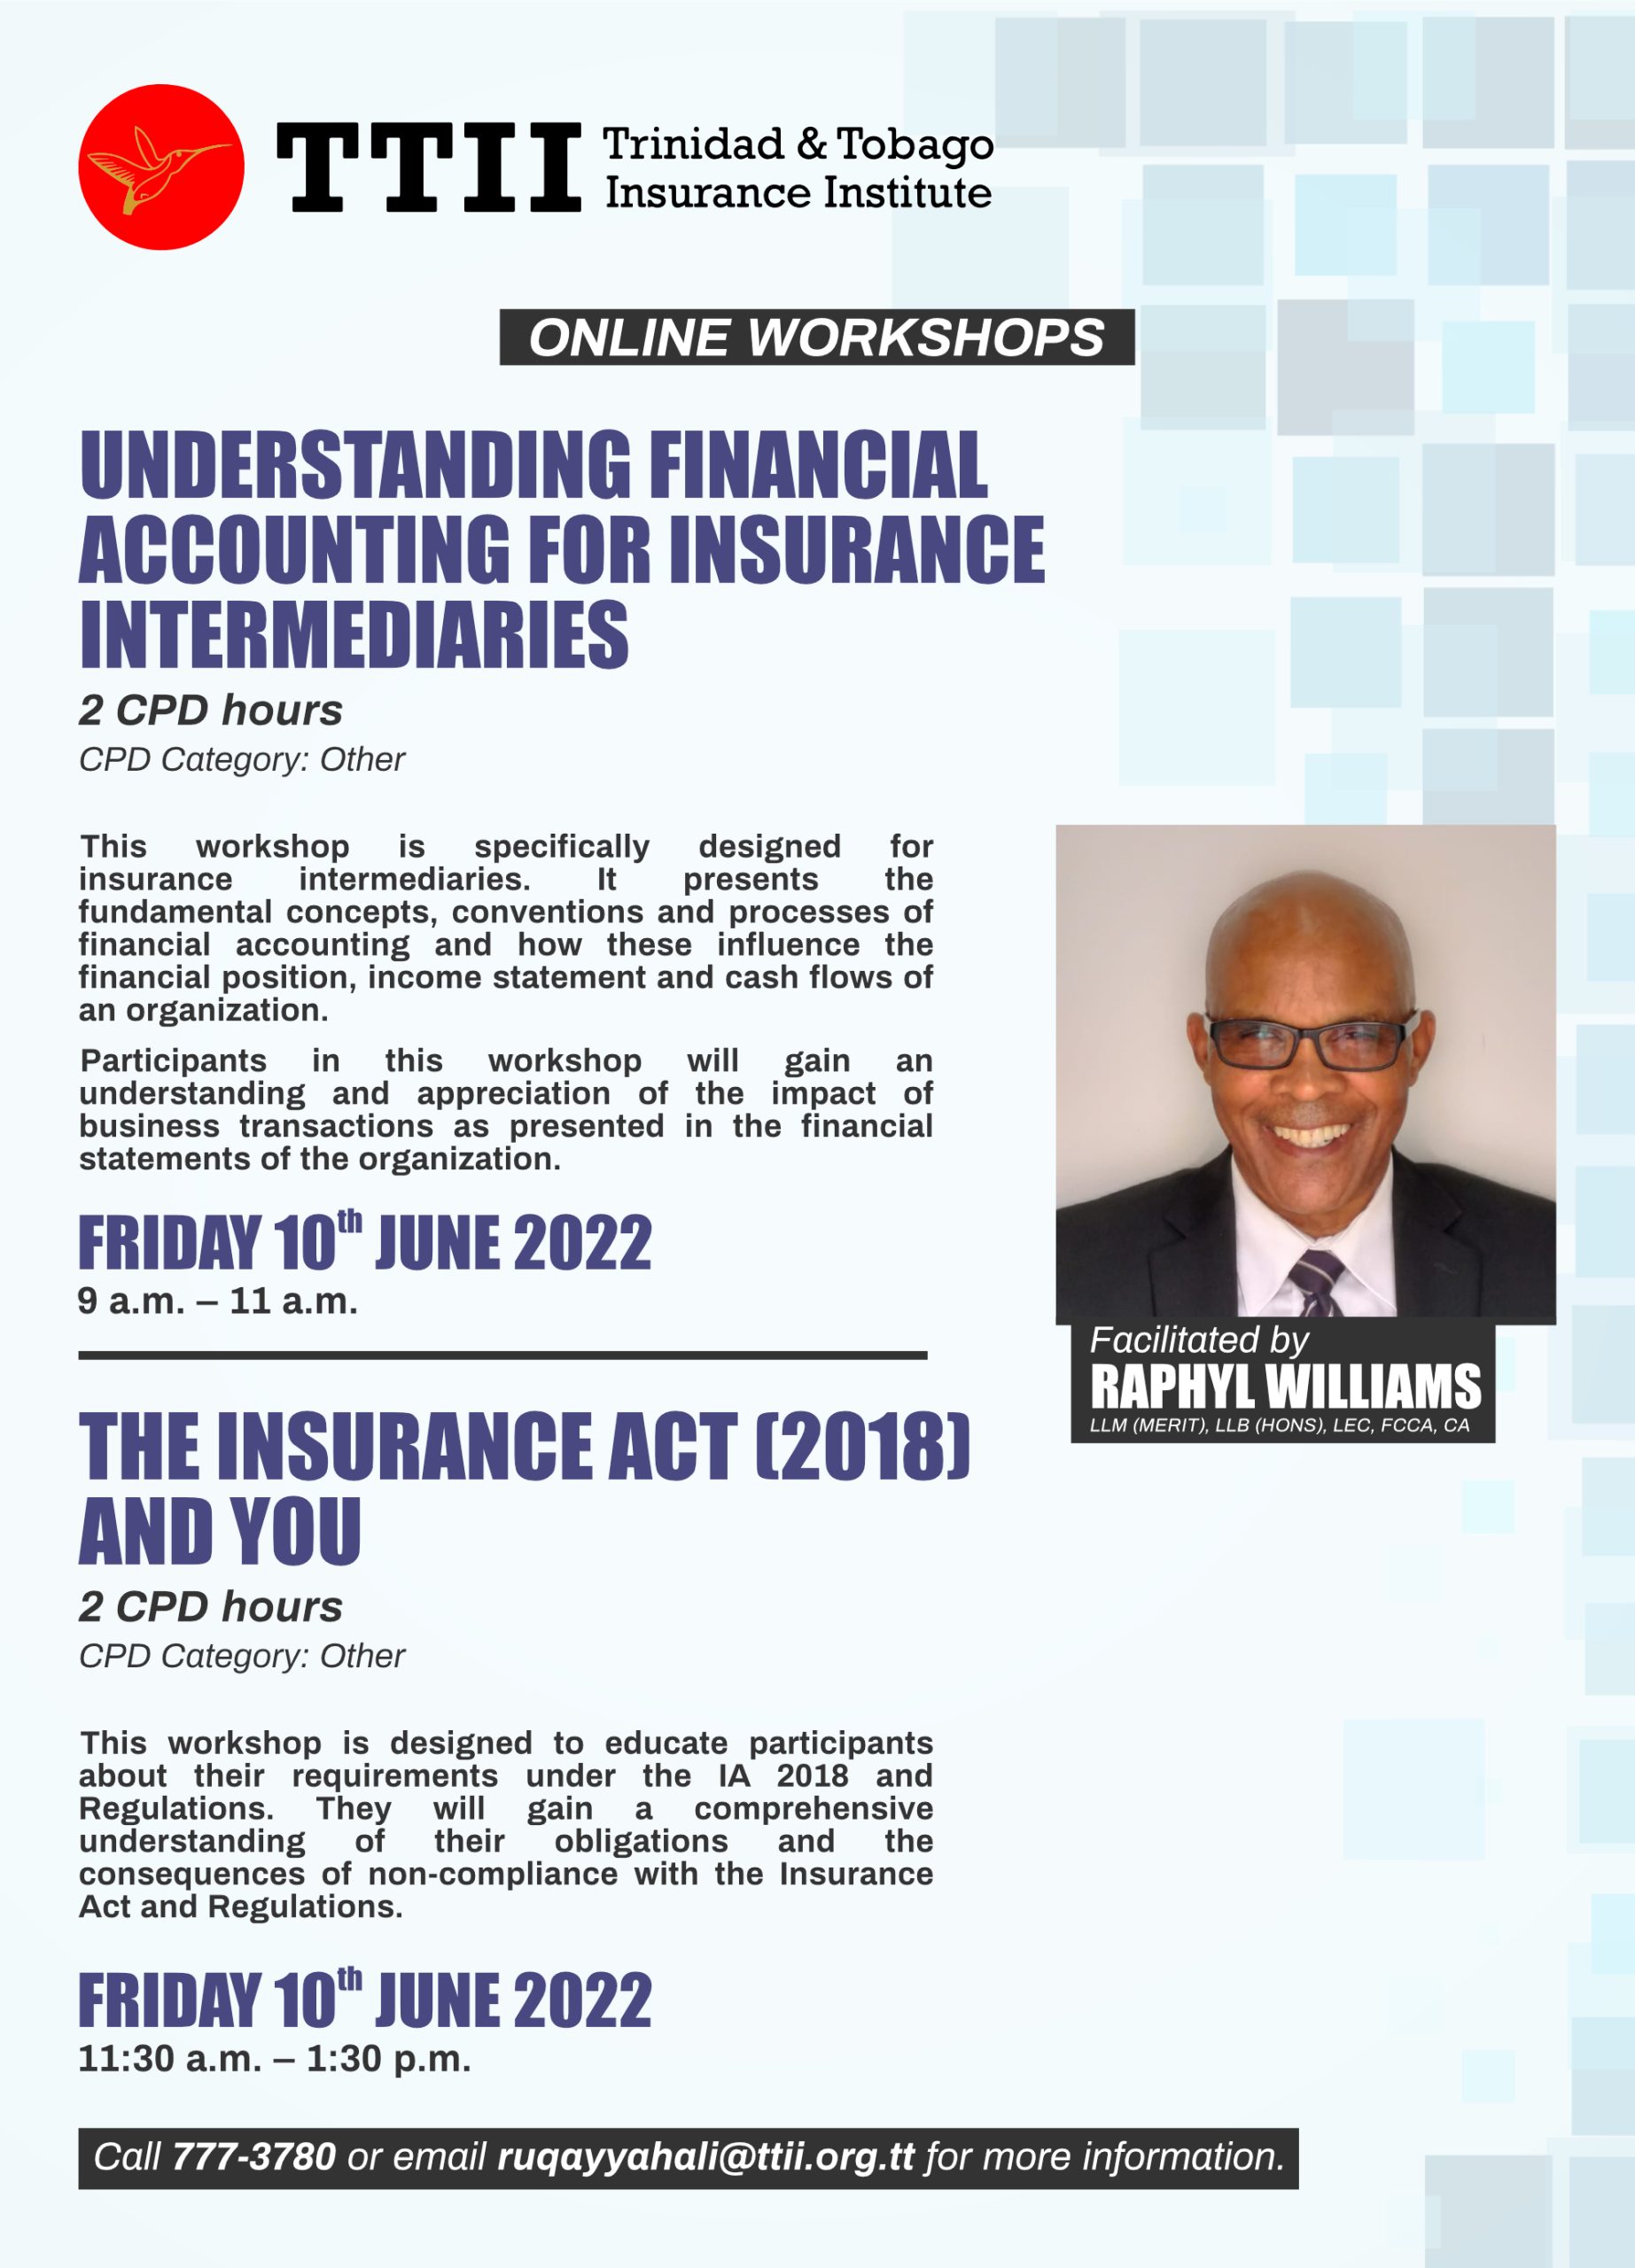 Understanding Financial Accounting for Insurance Intermediaries and The Insurance Act 2018 & You